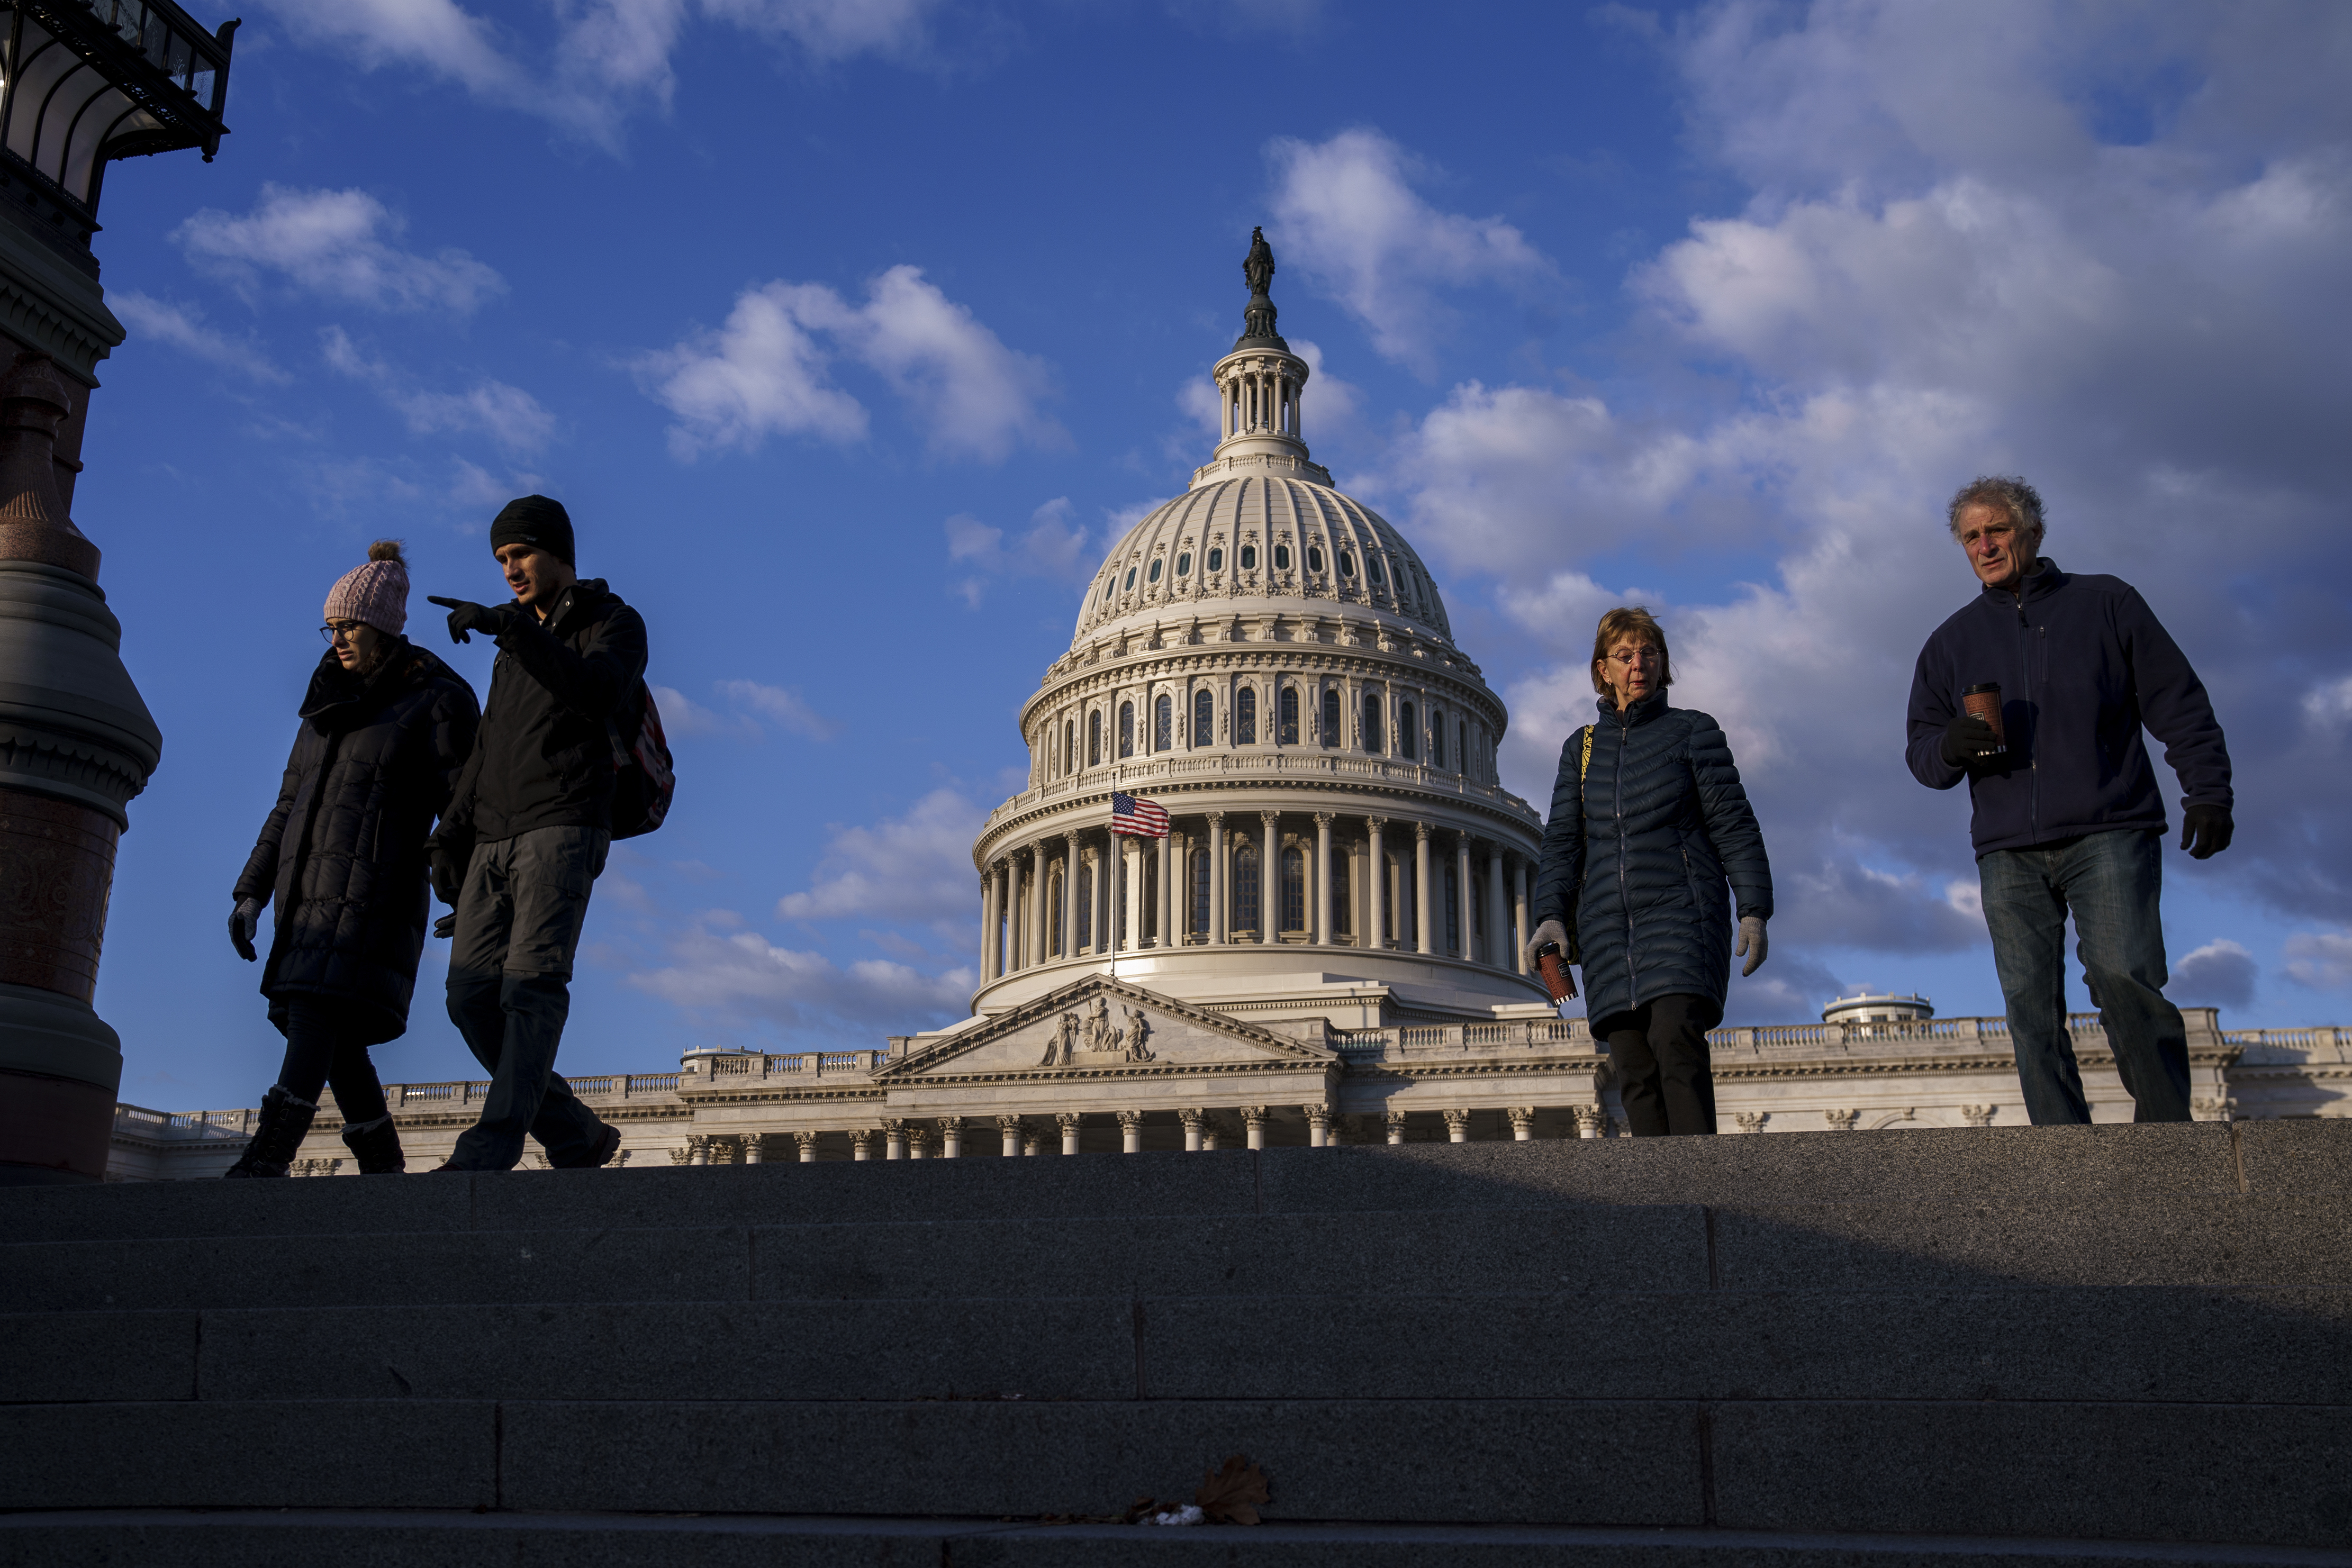 The Capitol is seen in Washington, early Monday, Jan. 6, 2020, as Congress returns to to Washington to face the challenge of fallout from President Donald Trump's military strike in Iraq that killed Iranian official, Gen. Qassem Soleimani. (AP Photo/J. Scott Applewhite)